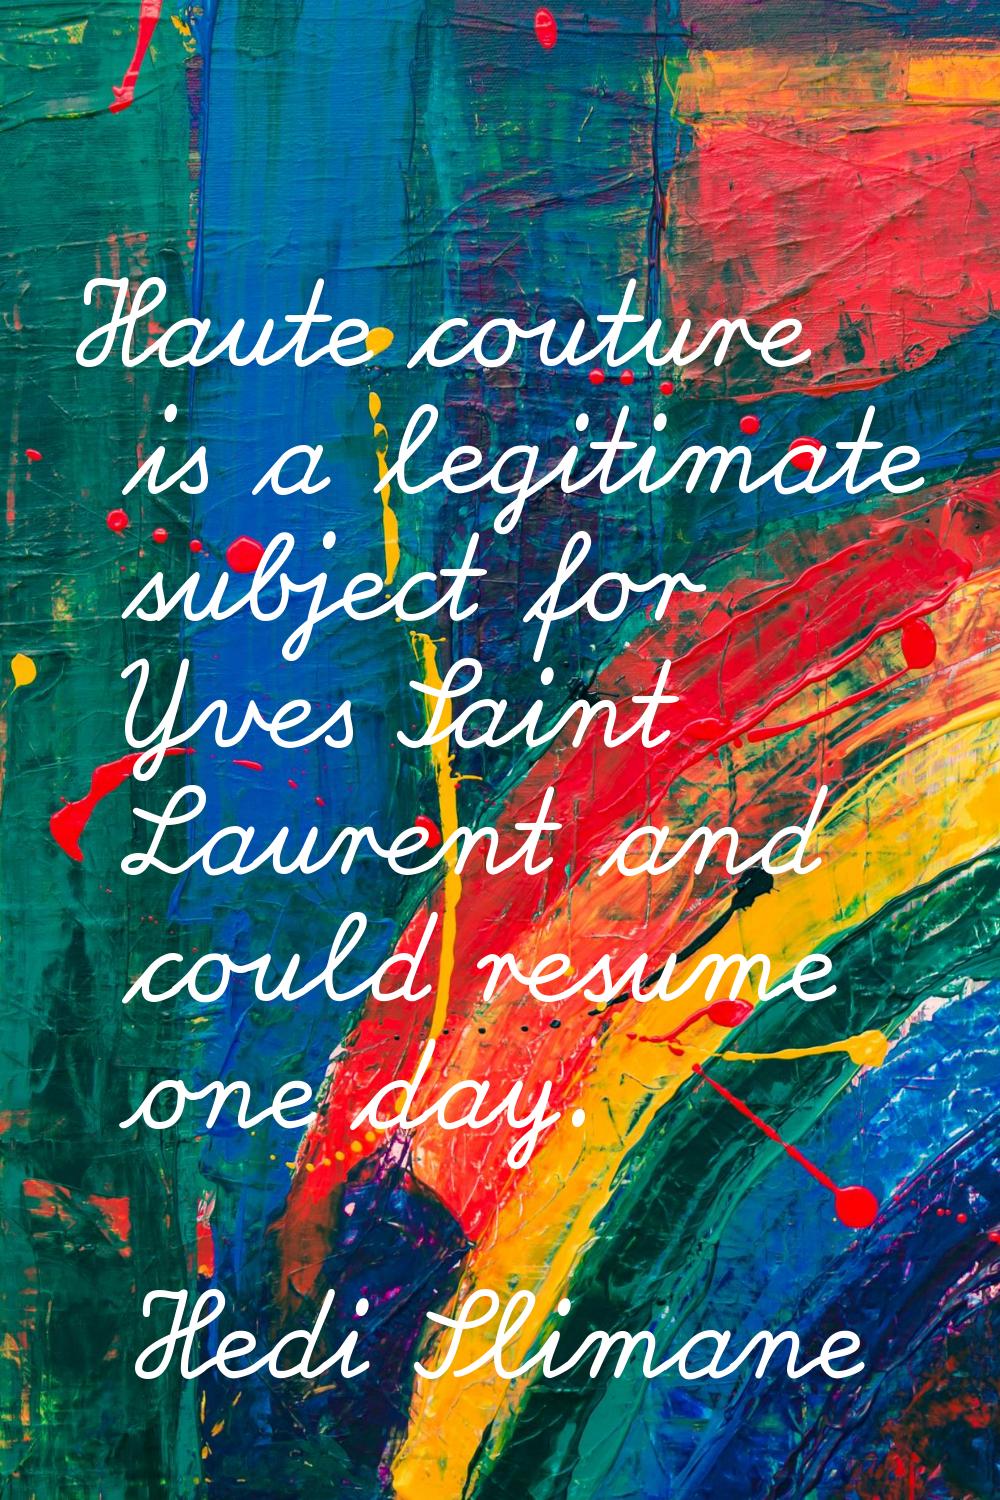 Haute couture is a legitimate subject for Yves Saint Laurent and could resume one day.